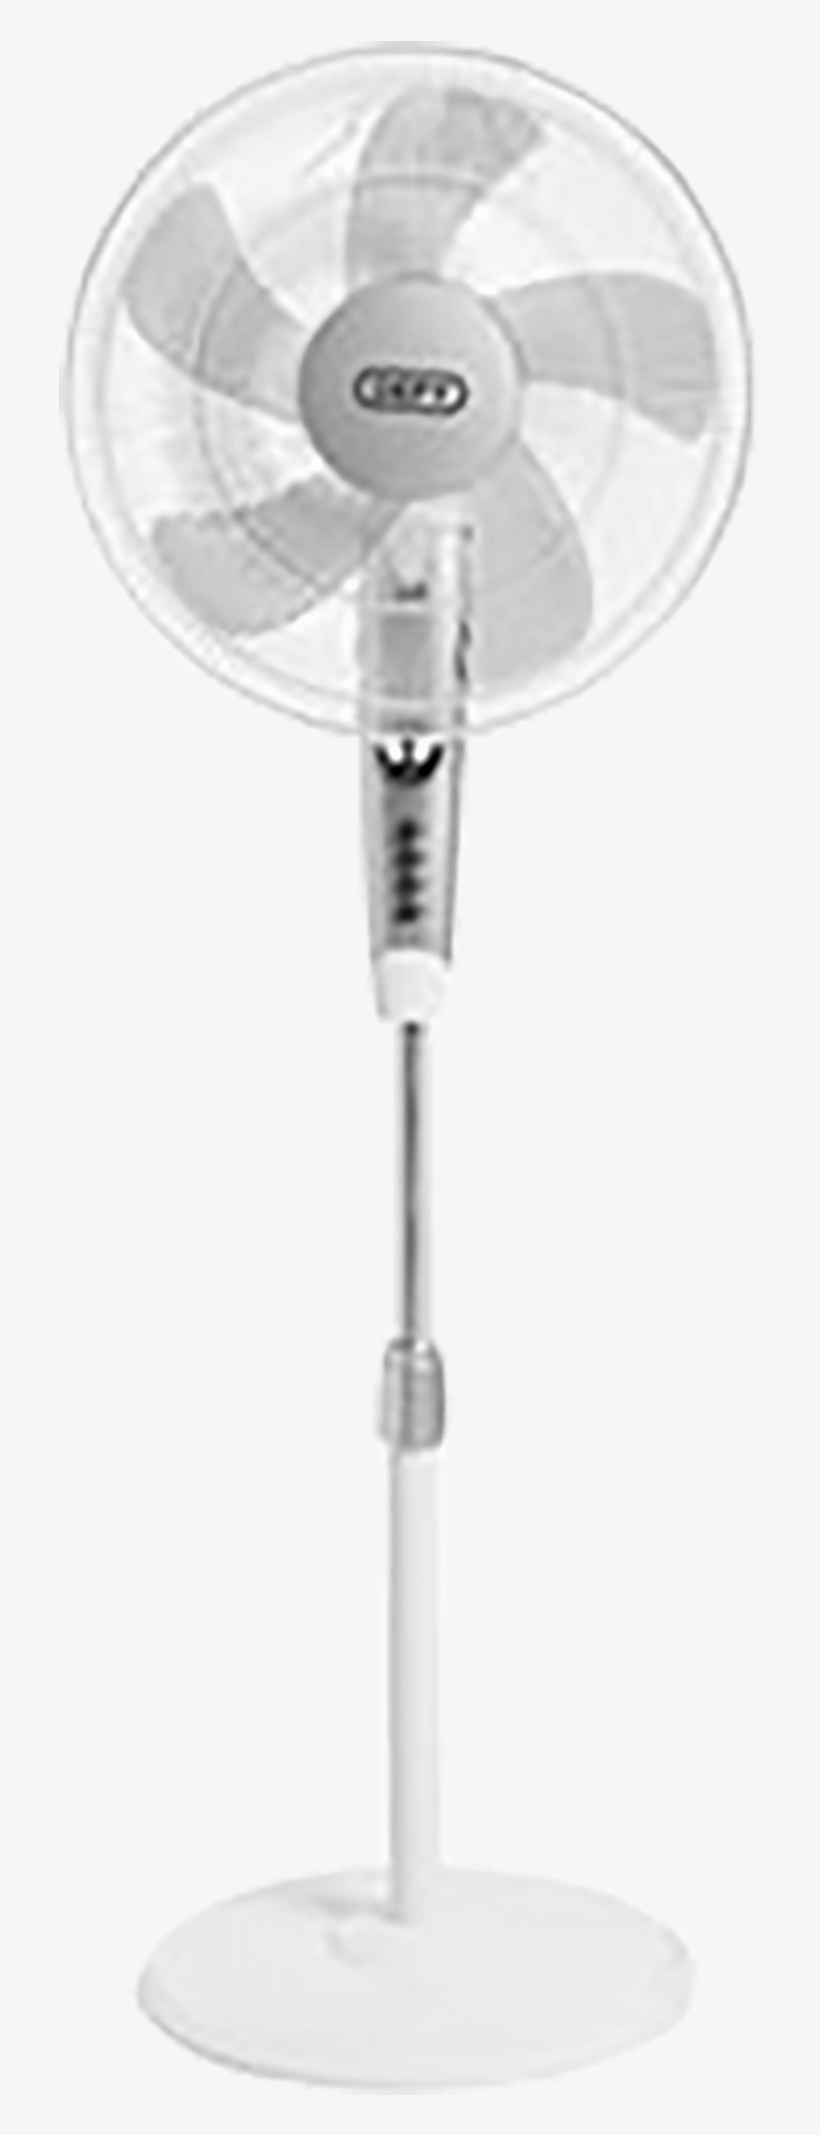 Stand Fan Model - Circle, transparent png #8556905